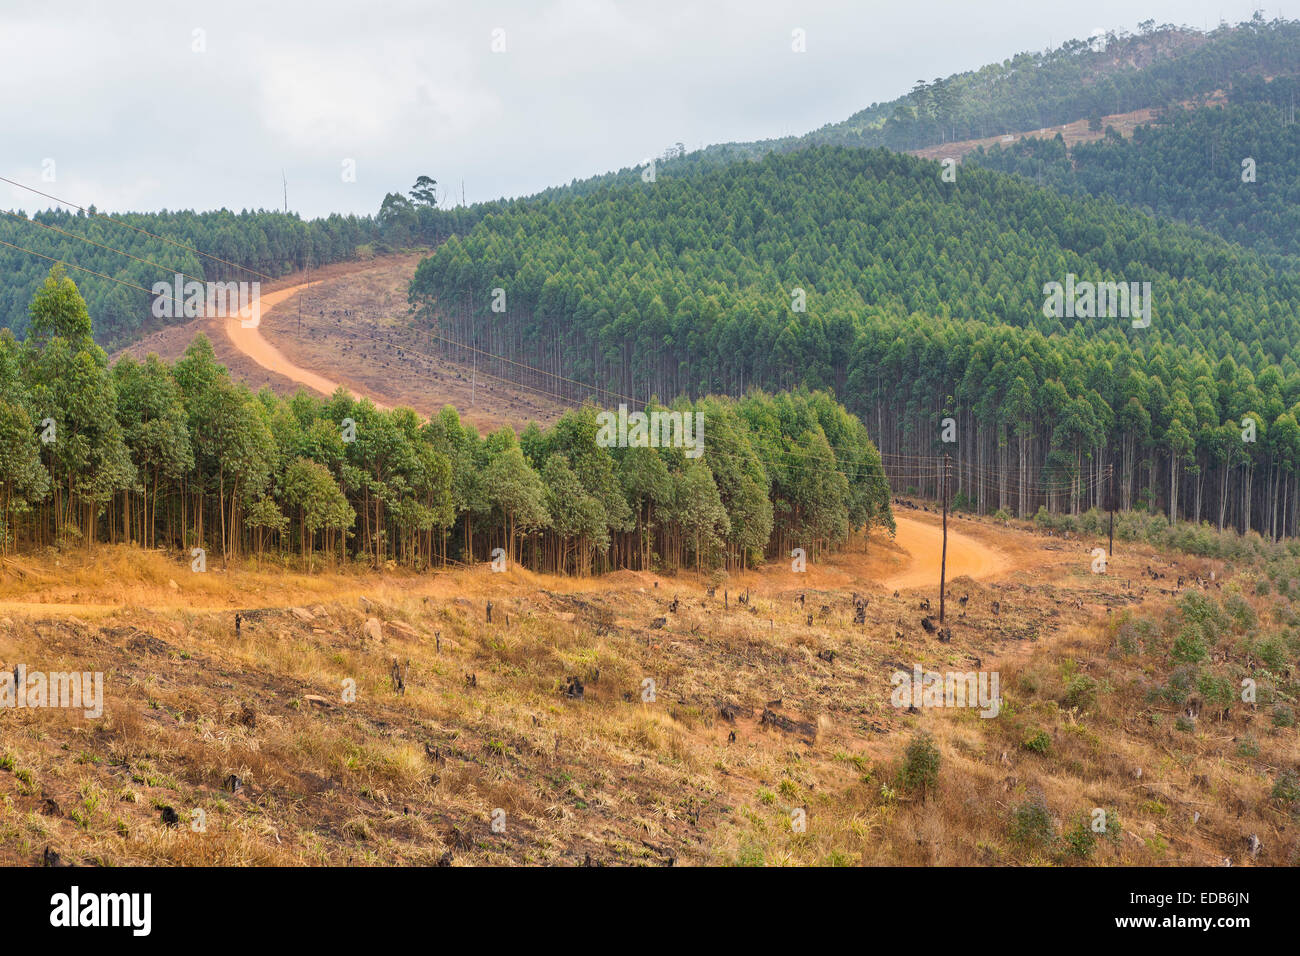 SWAZILAND, AFRICA - Timber industry in Hhohho District Stock Photo